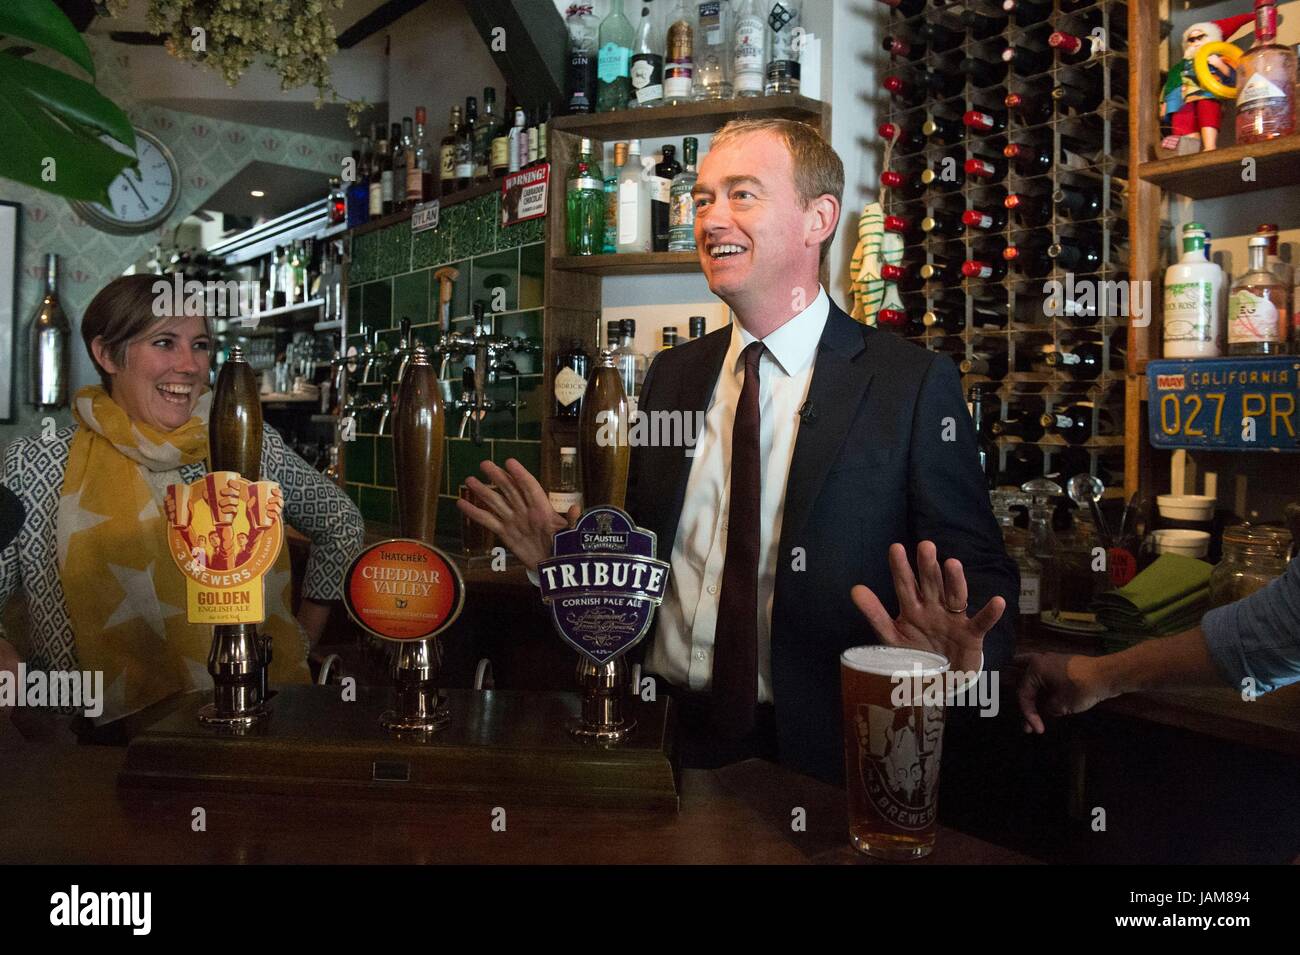 Liberal Democrats leader Tim Farron turns down a pint during a visit to Dylans The King Arms pub in St Albans, while on the General Election campaign trail. Stock Photo